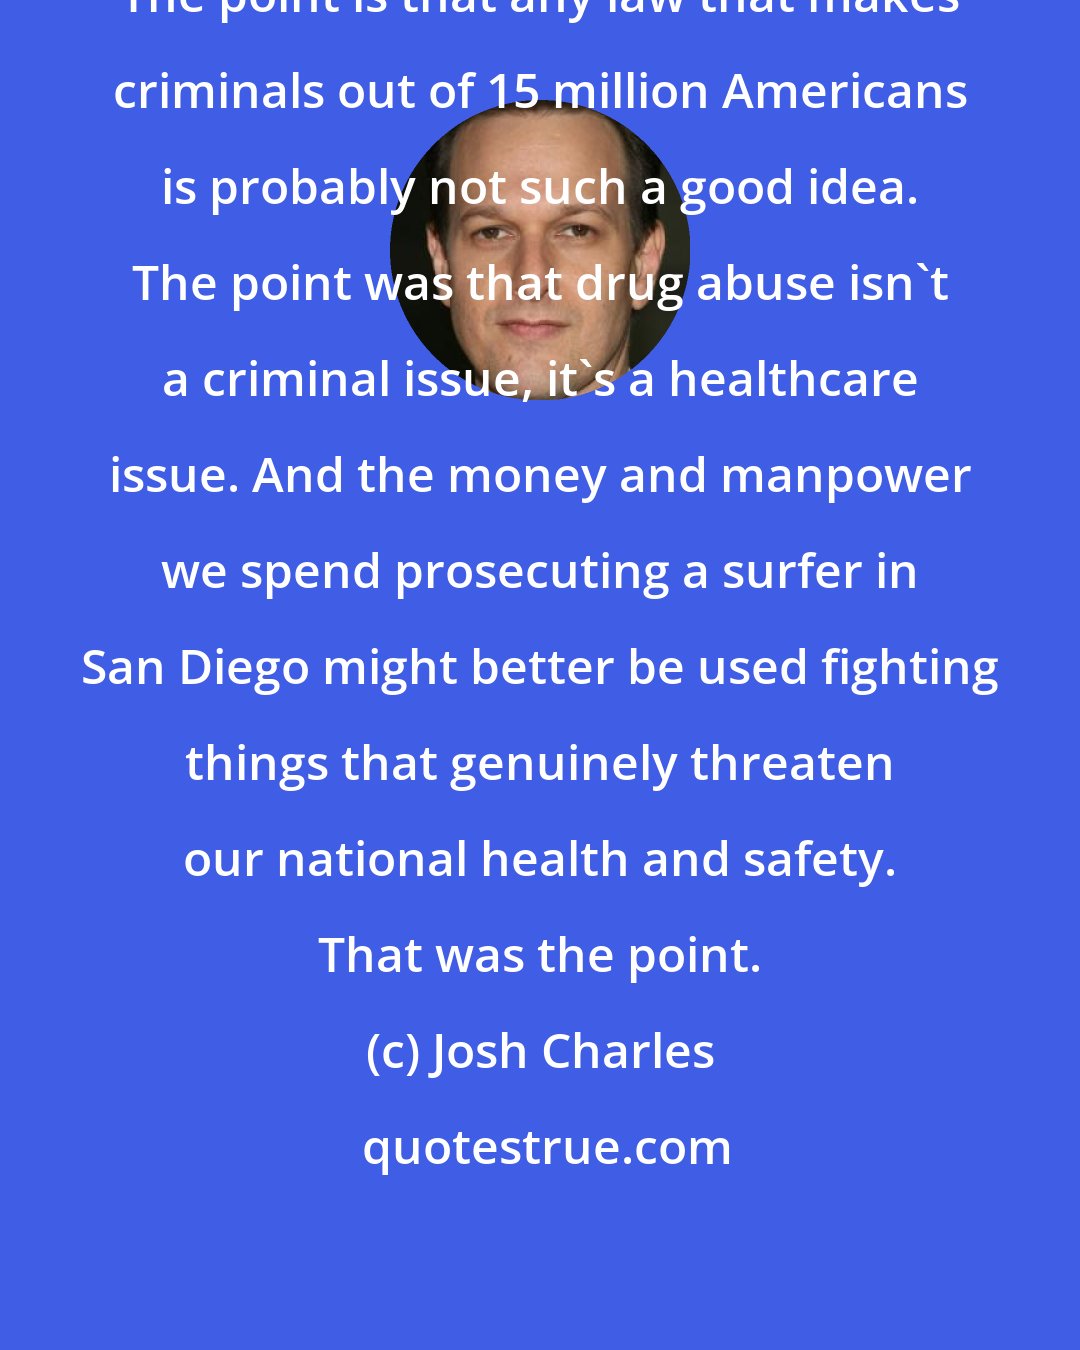 Josh Charles: The point is that any law that makes criminals out of 15 million Americans is probably not such a good idea. The point was that drug abuse isn't a criminal issue, it's a healthcare issue. And the money and manpower we spend prosecuting a surfer in San Diego might better be used fighting things that genuinely threaten our national health and safety. That was the point.